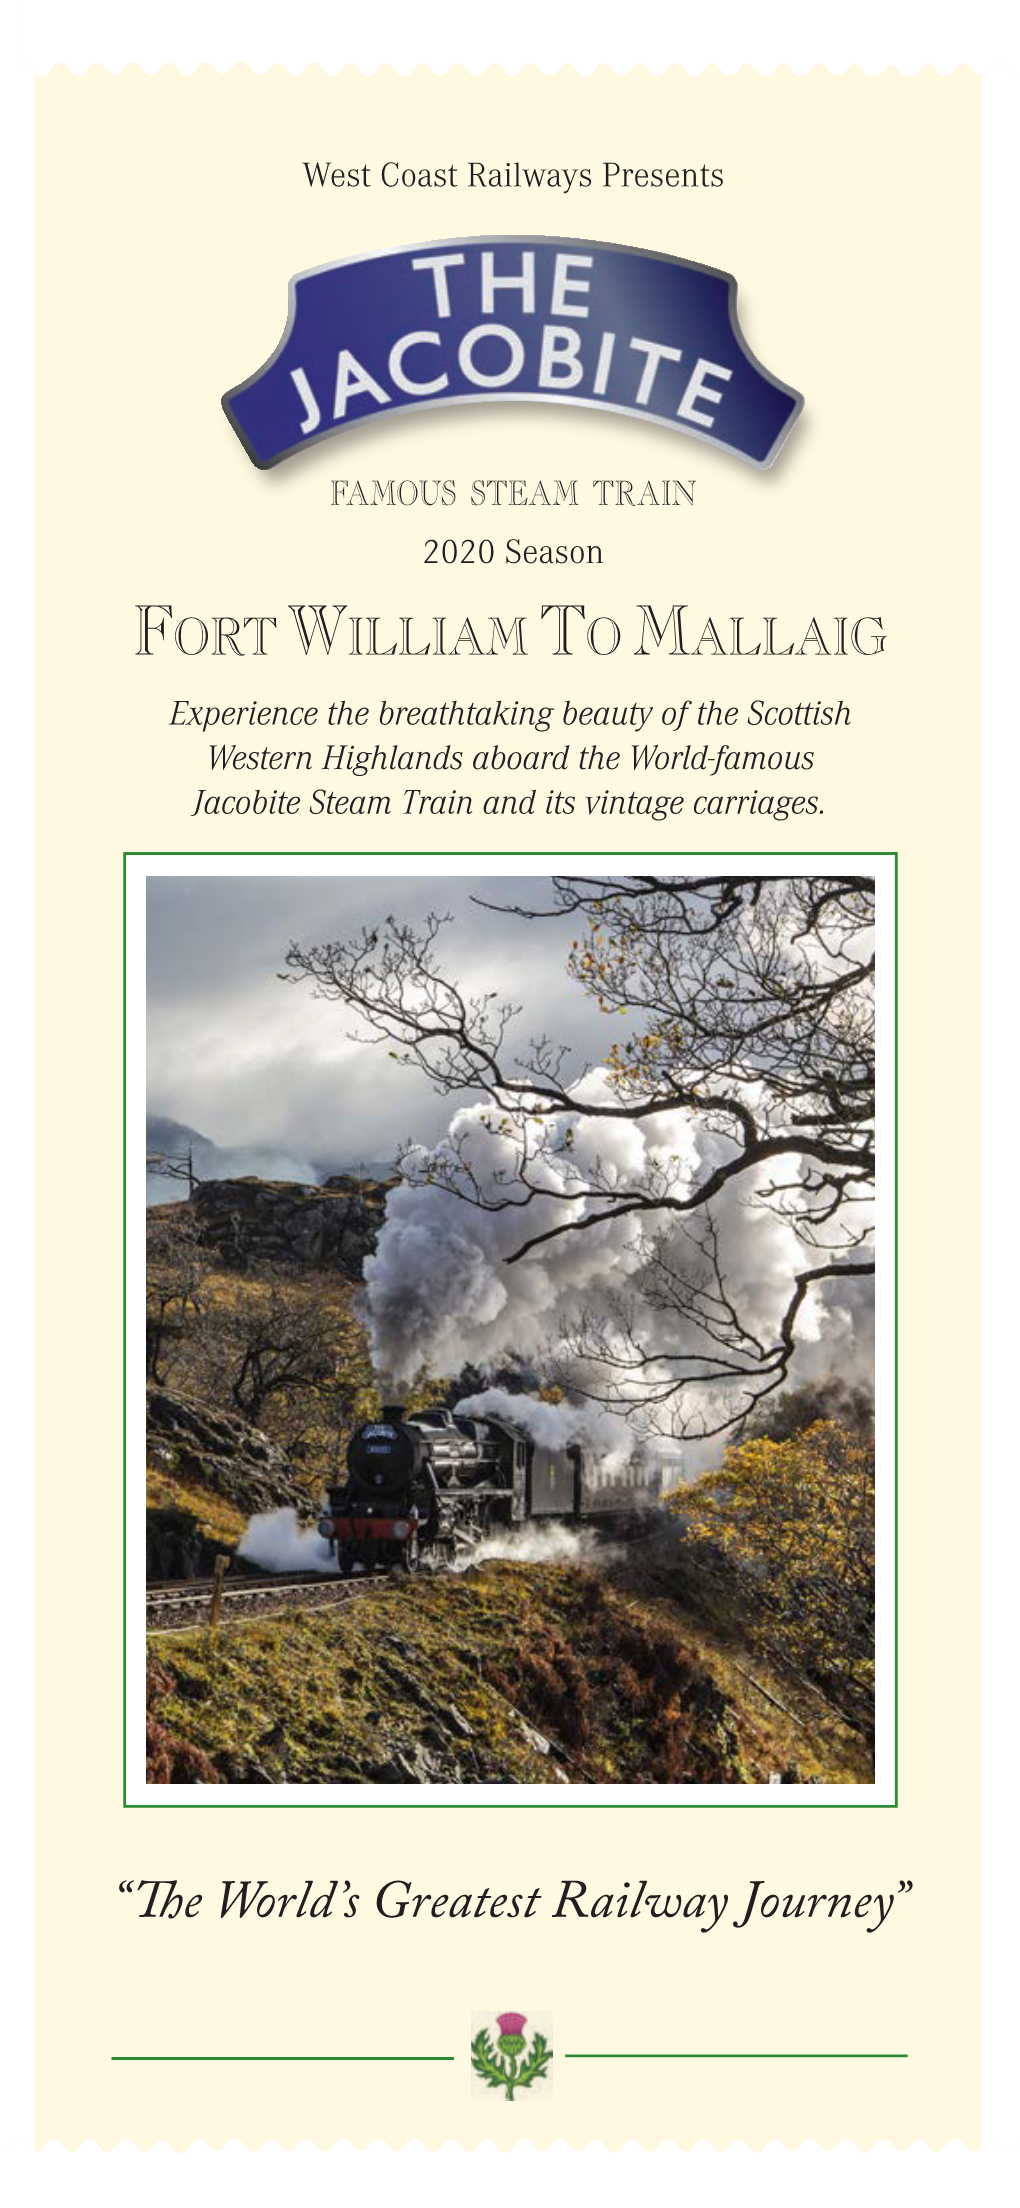 “The World's Greatest Railway Journey” FORT WILLIAM to MALLAIG